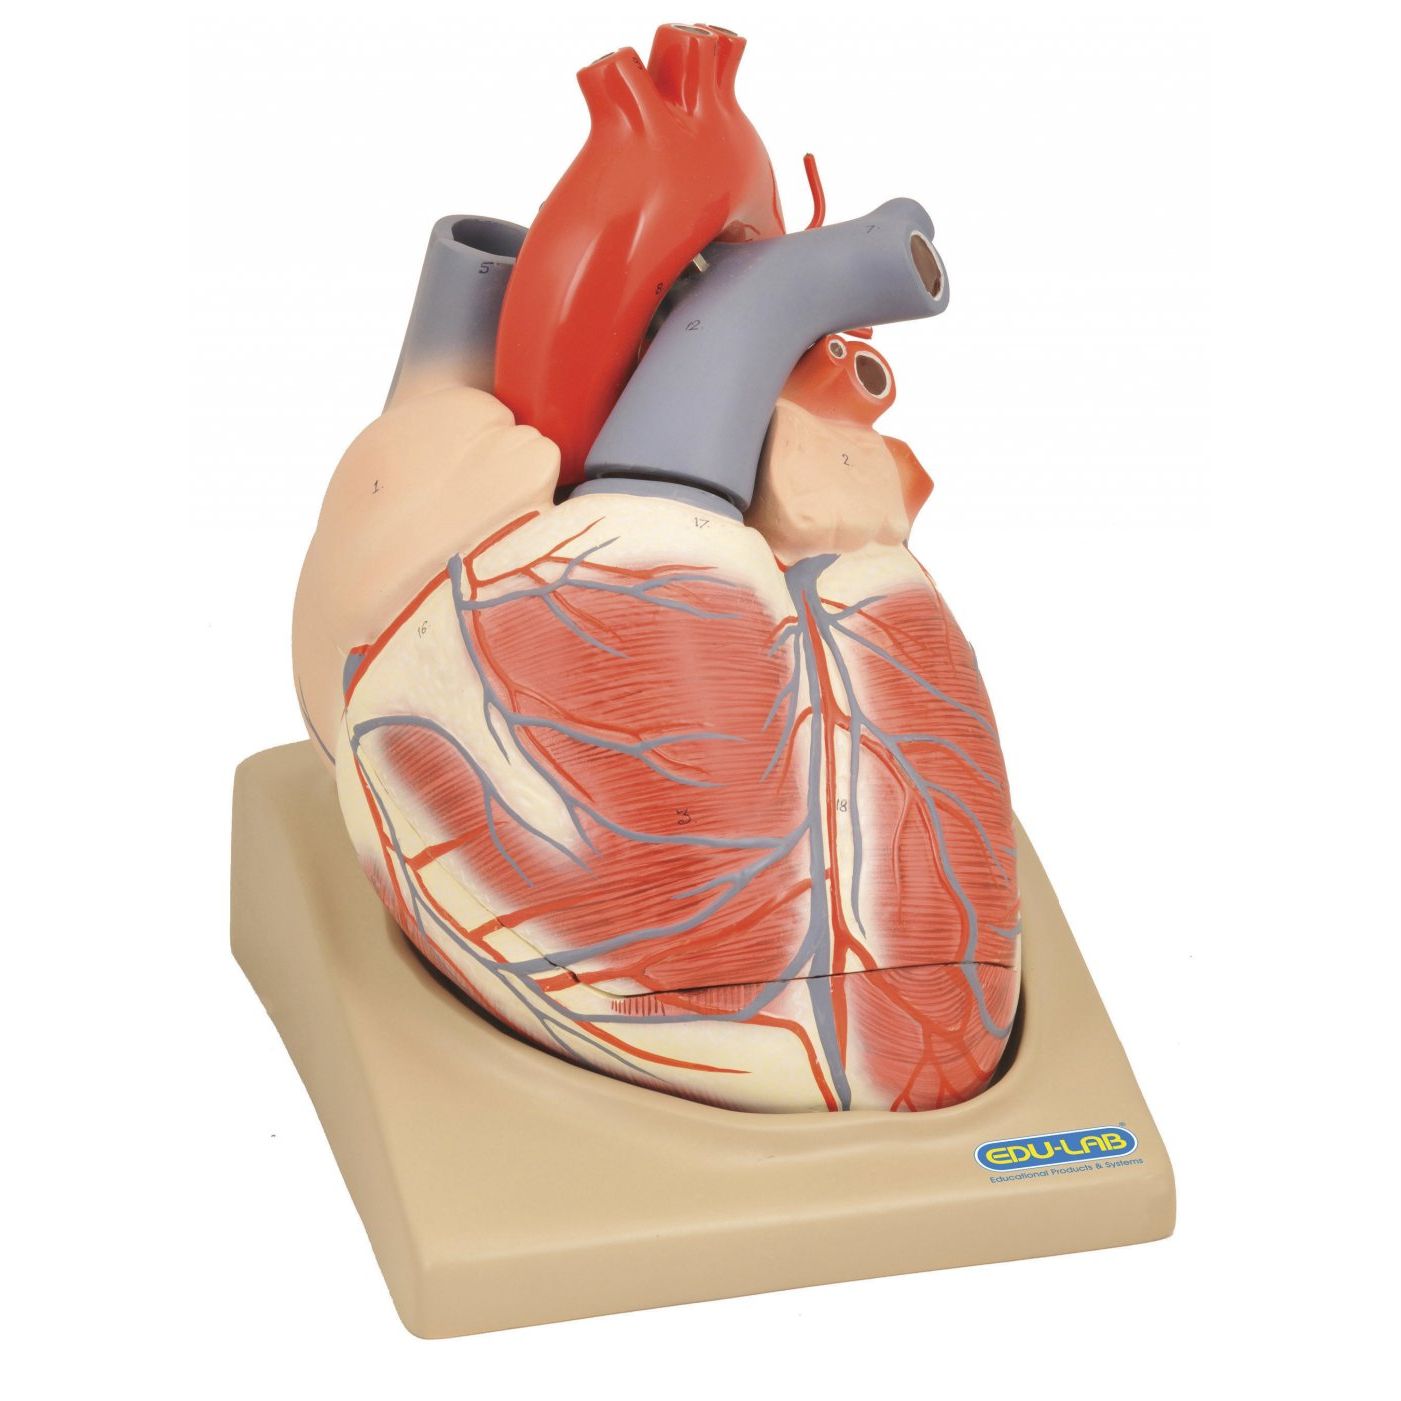 Model: Heart (Extra Large) 2/4 Parts